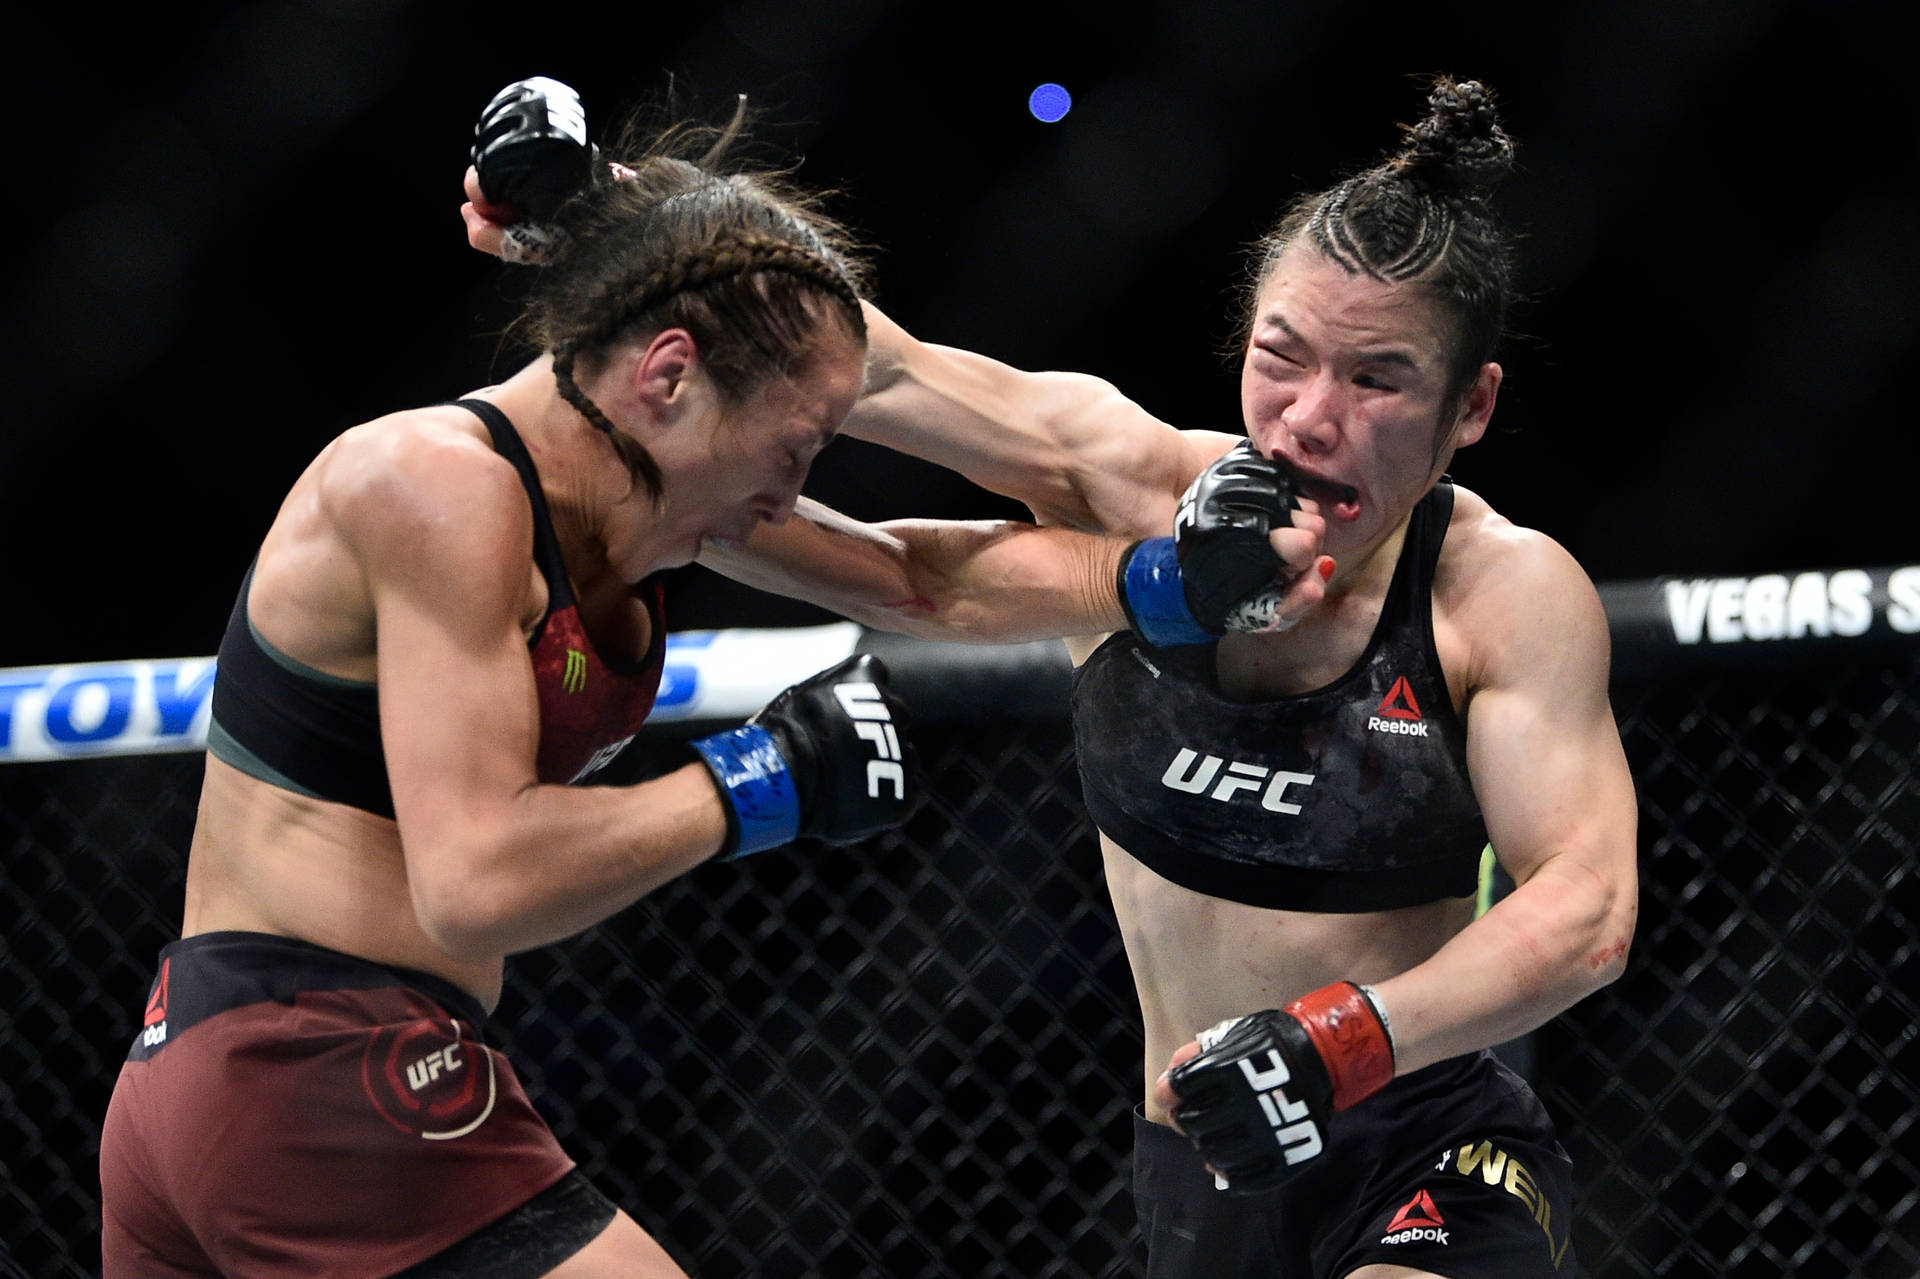 Caption: UFC Fighters Zhang Weili and Joanna Jedrzejczyk in Intensive Combat Wallpaper